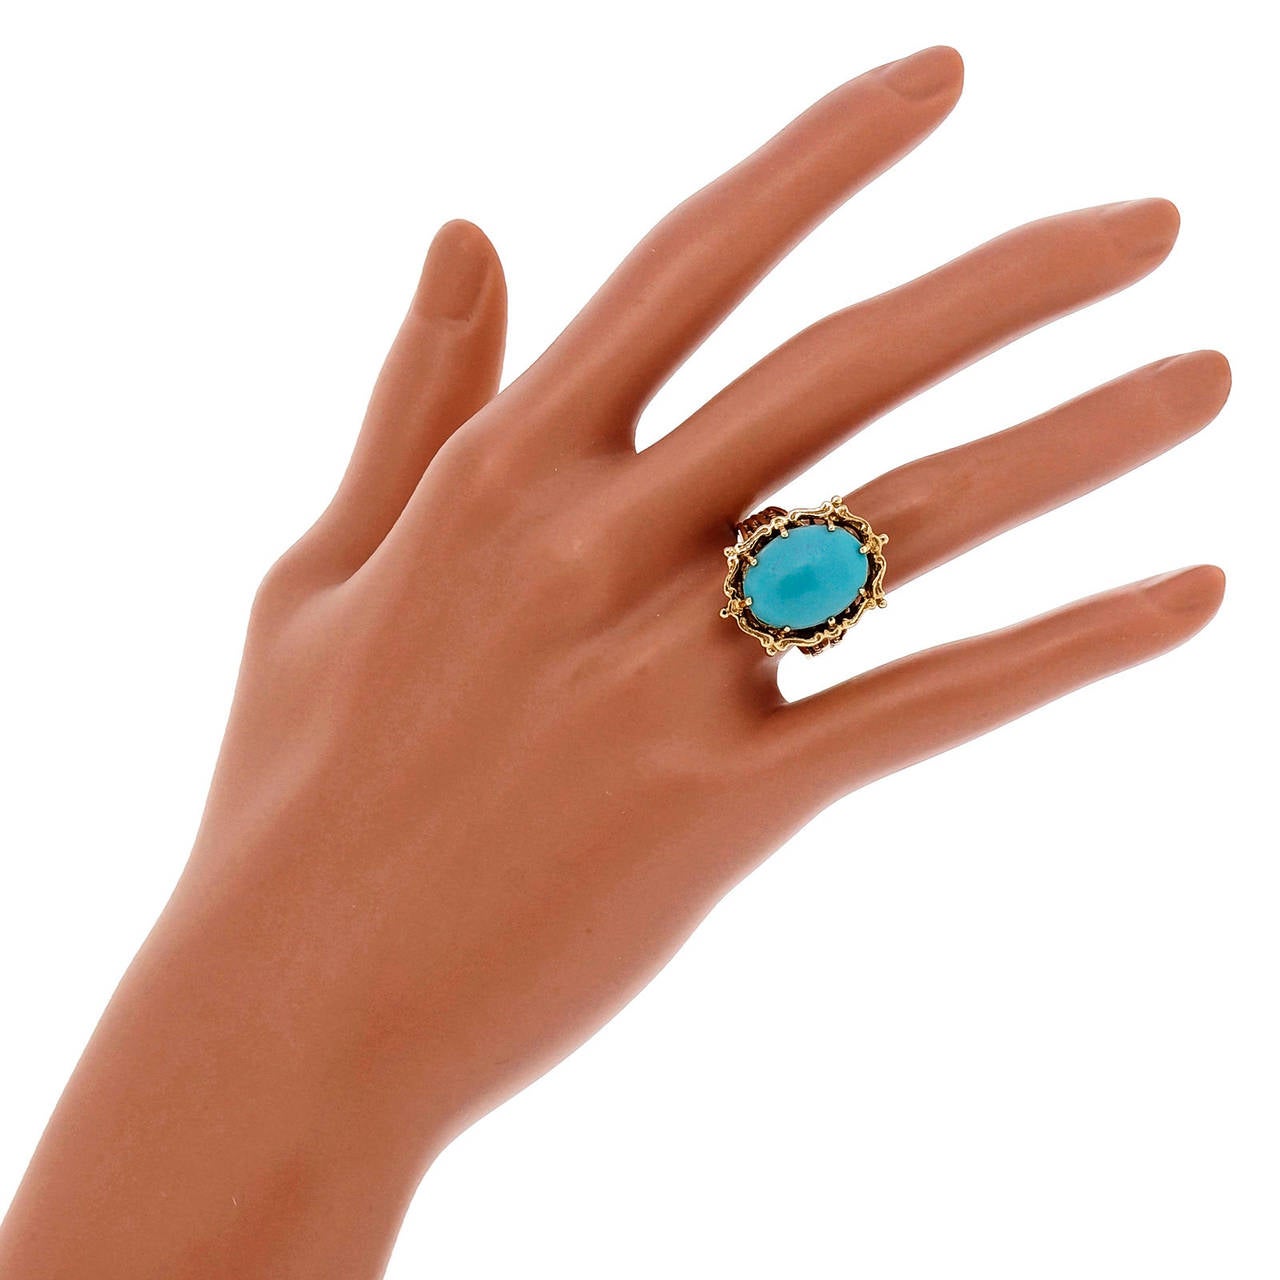 Men's Large Oval Natural Turquoise Gold Cocktail Ring